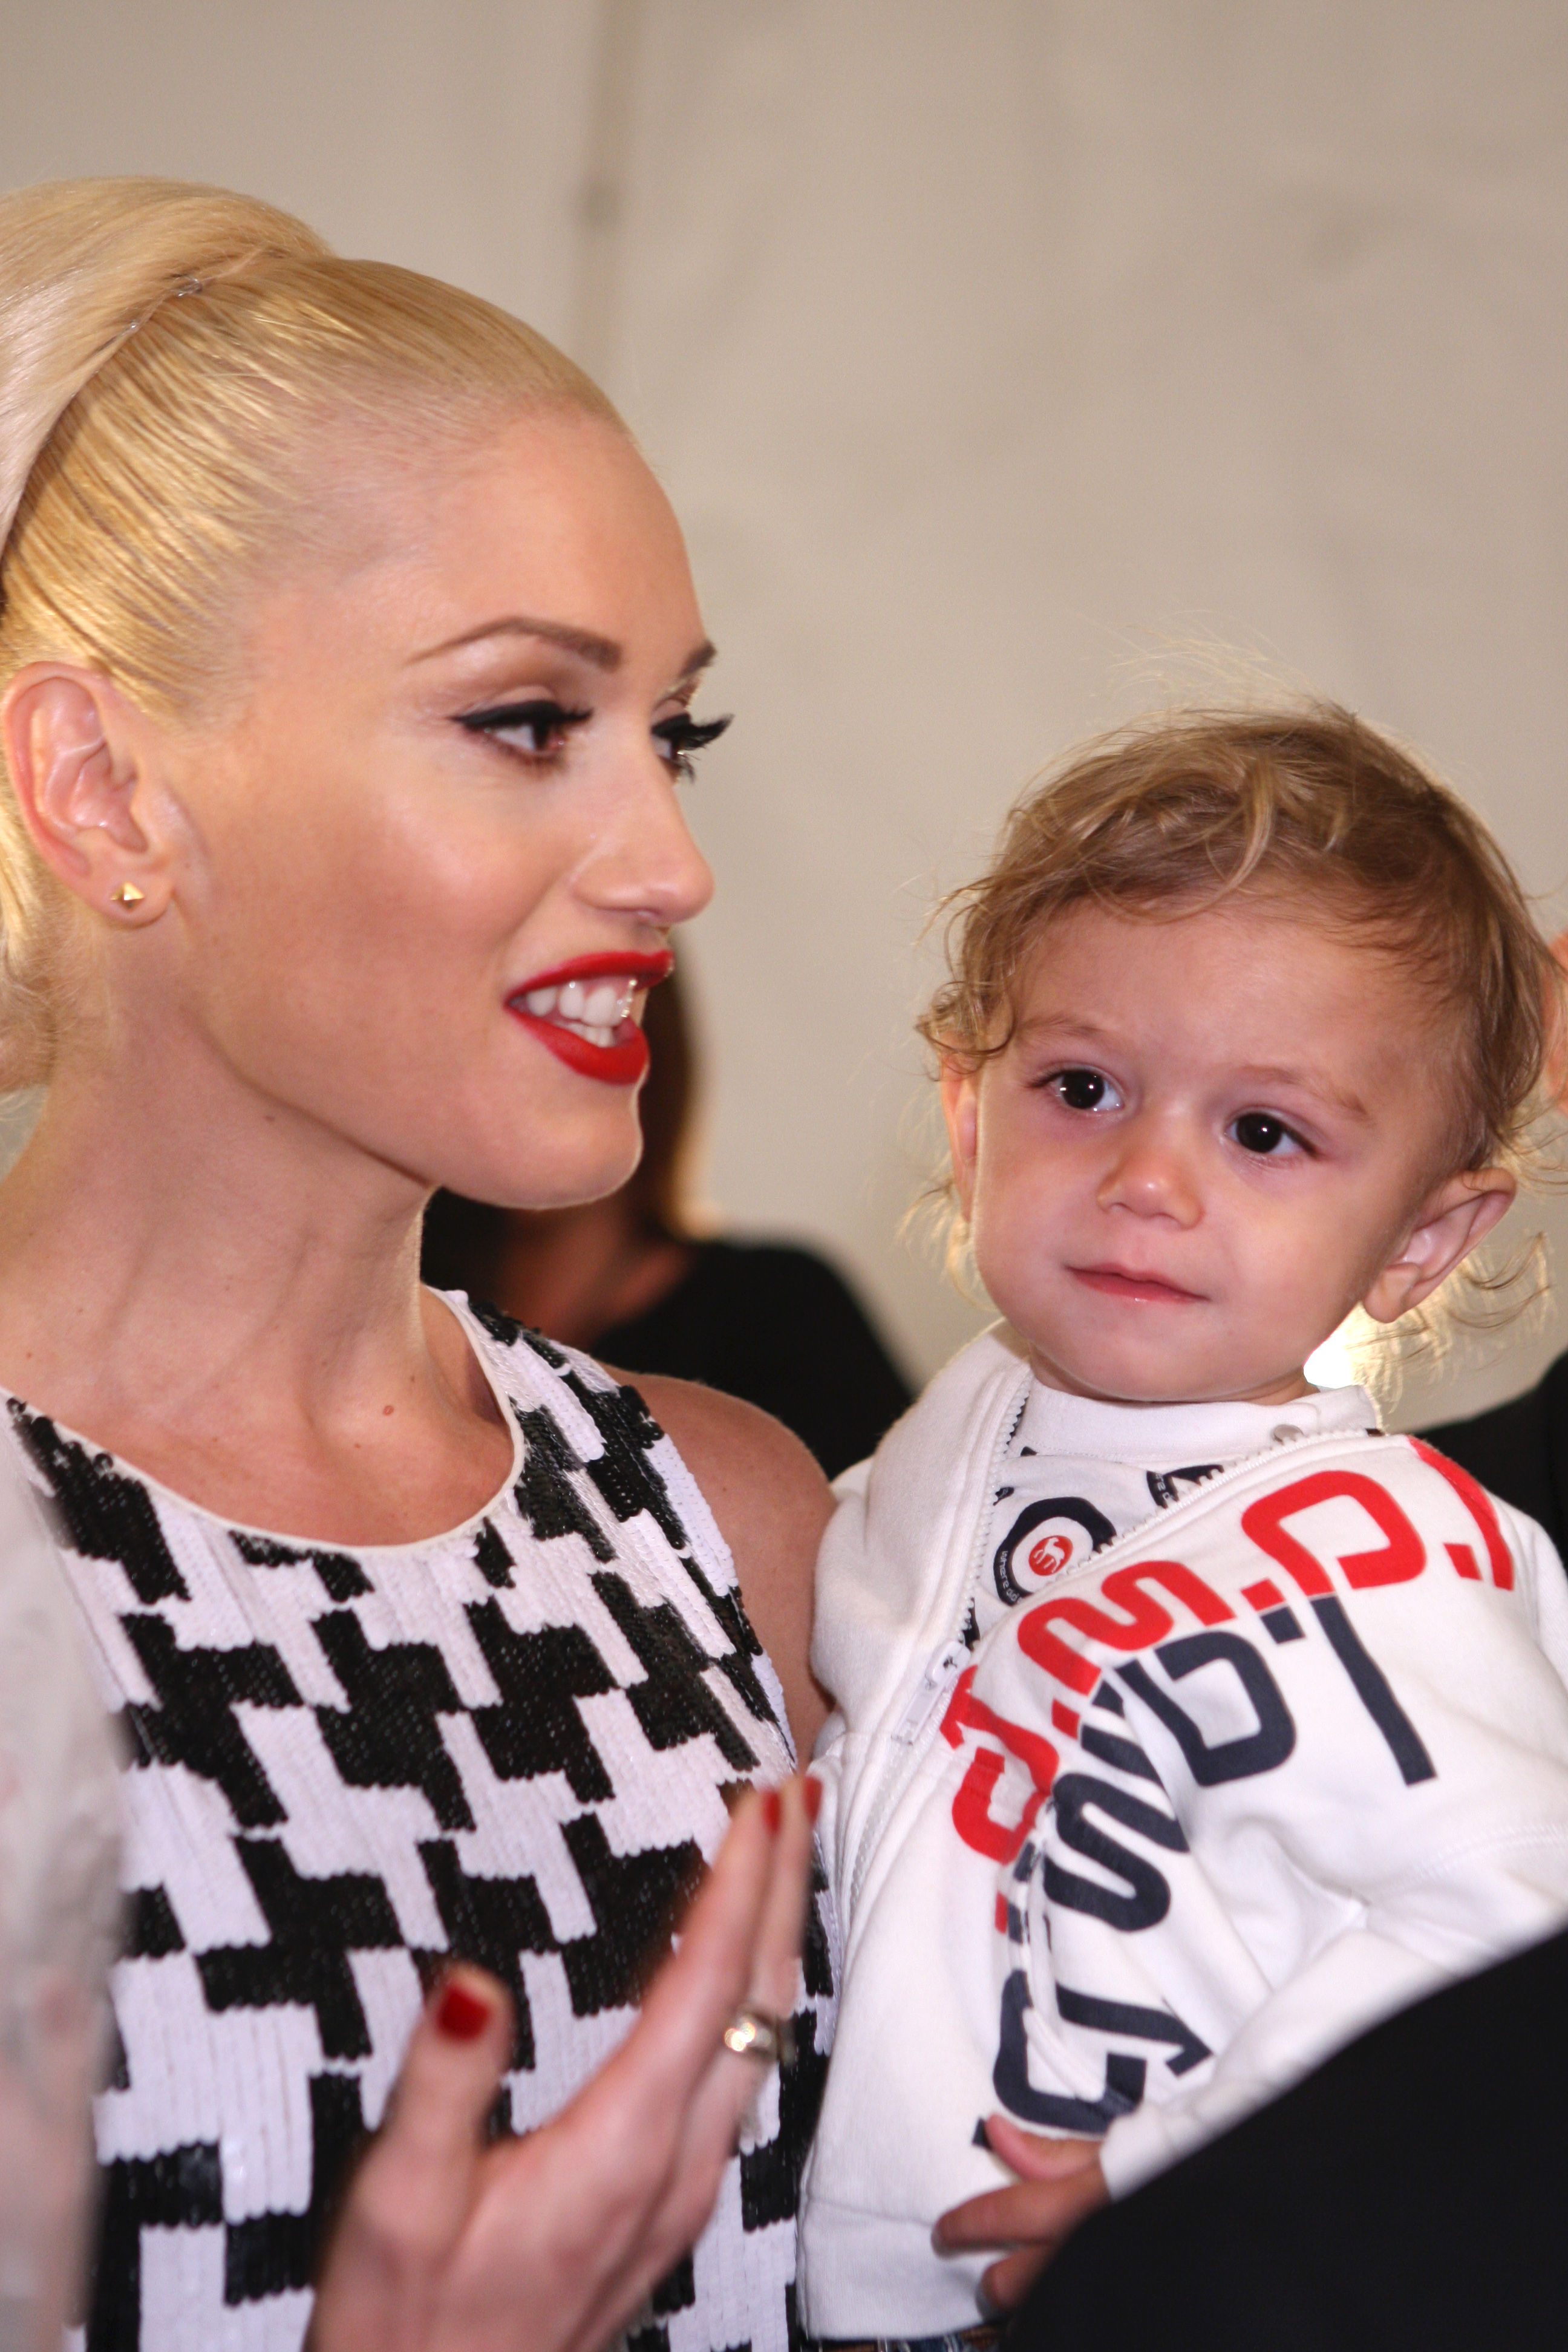 Gwen Stefani with her son, Kingston Rossdale backstage at L.A.M.B Spring 2008 during Mercedes-Benz Fashion Week on September 5, 2007 in New York City | Source: Getty Images